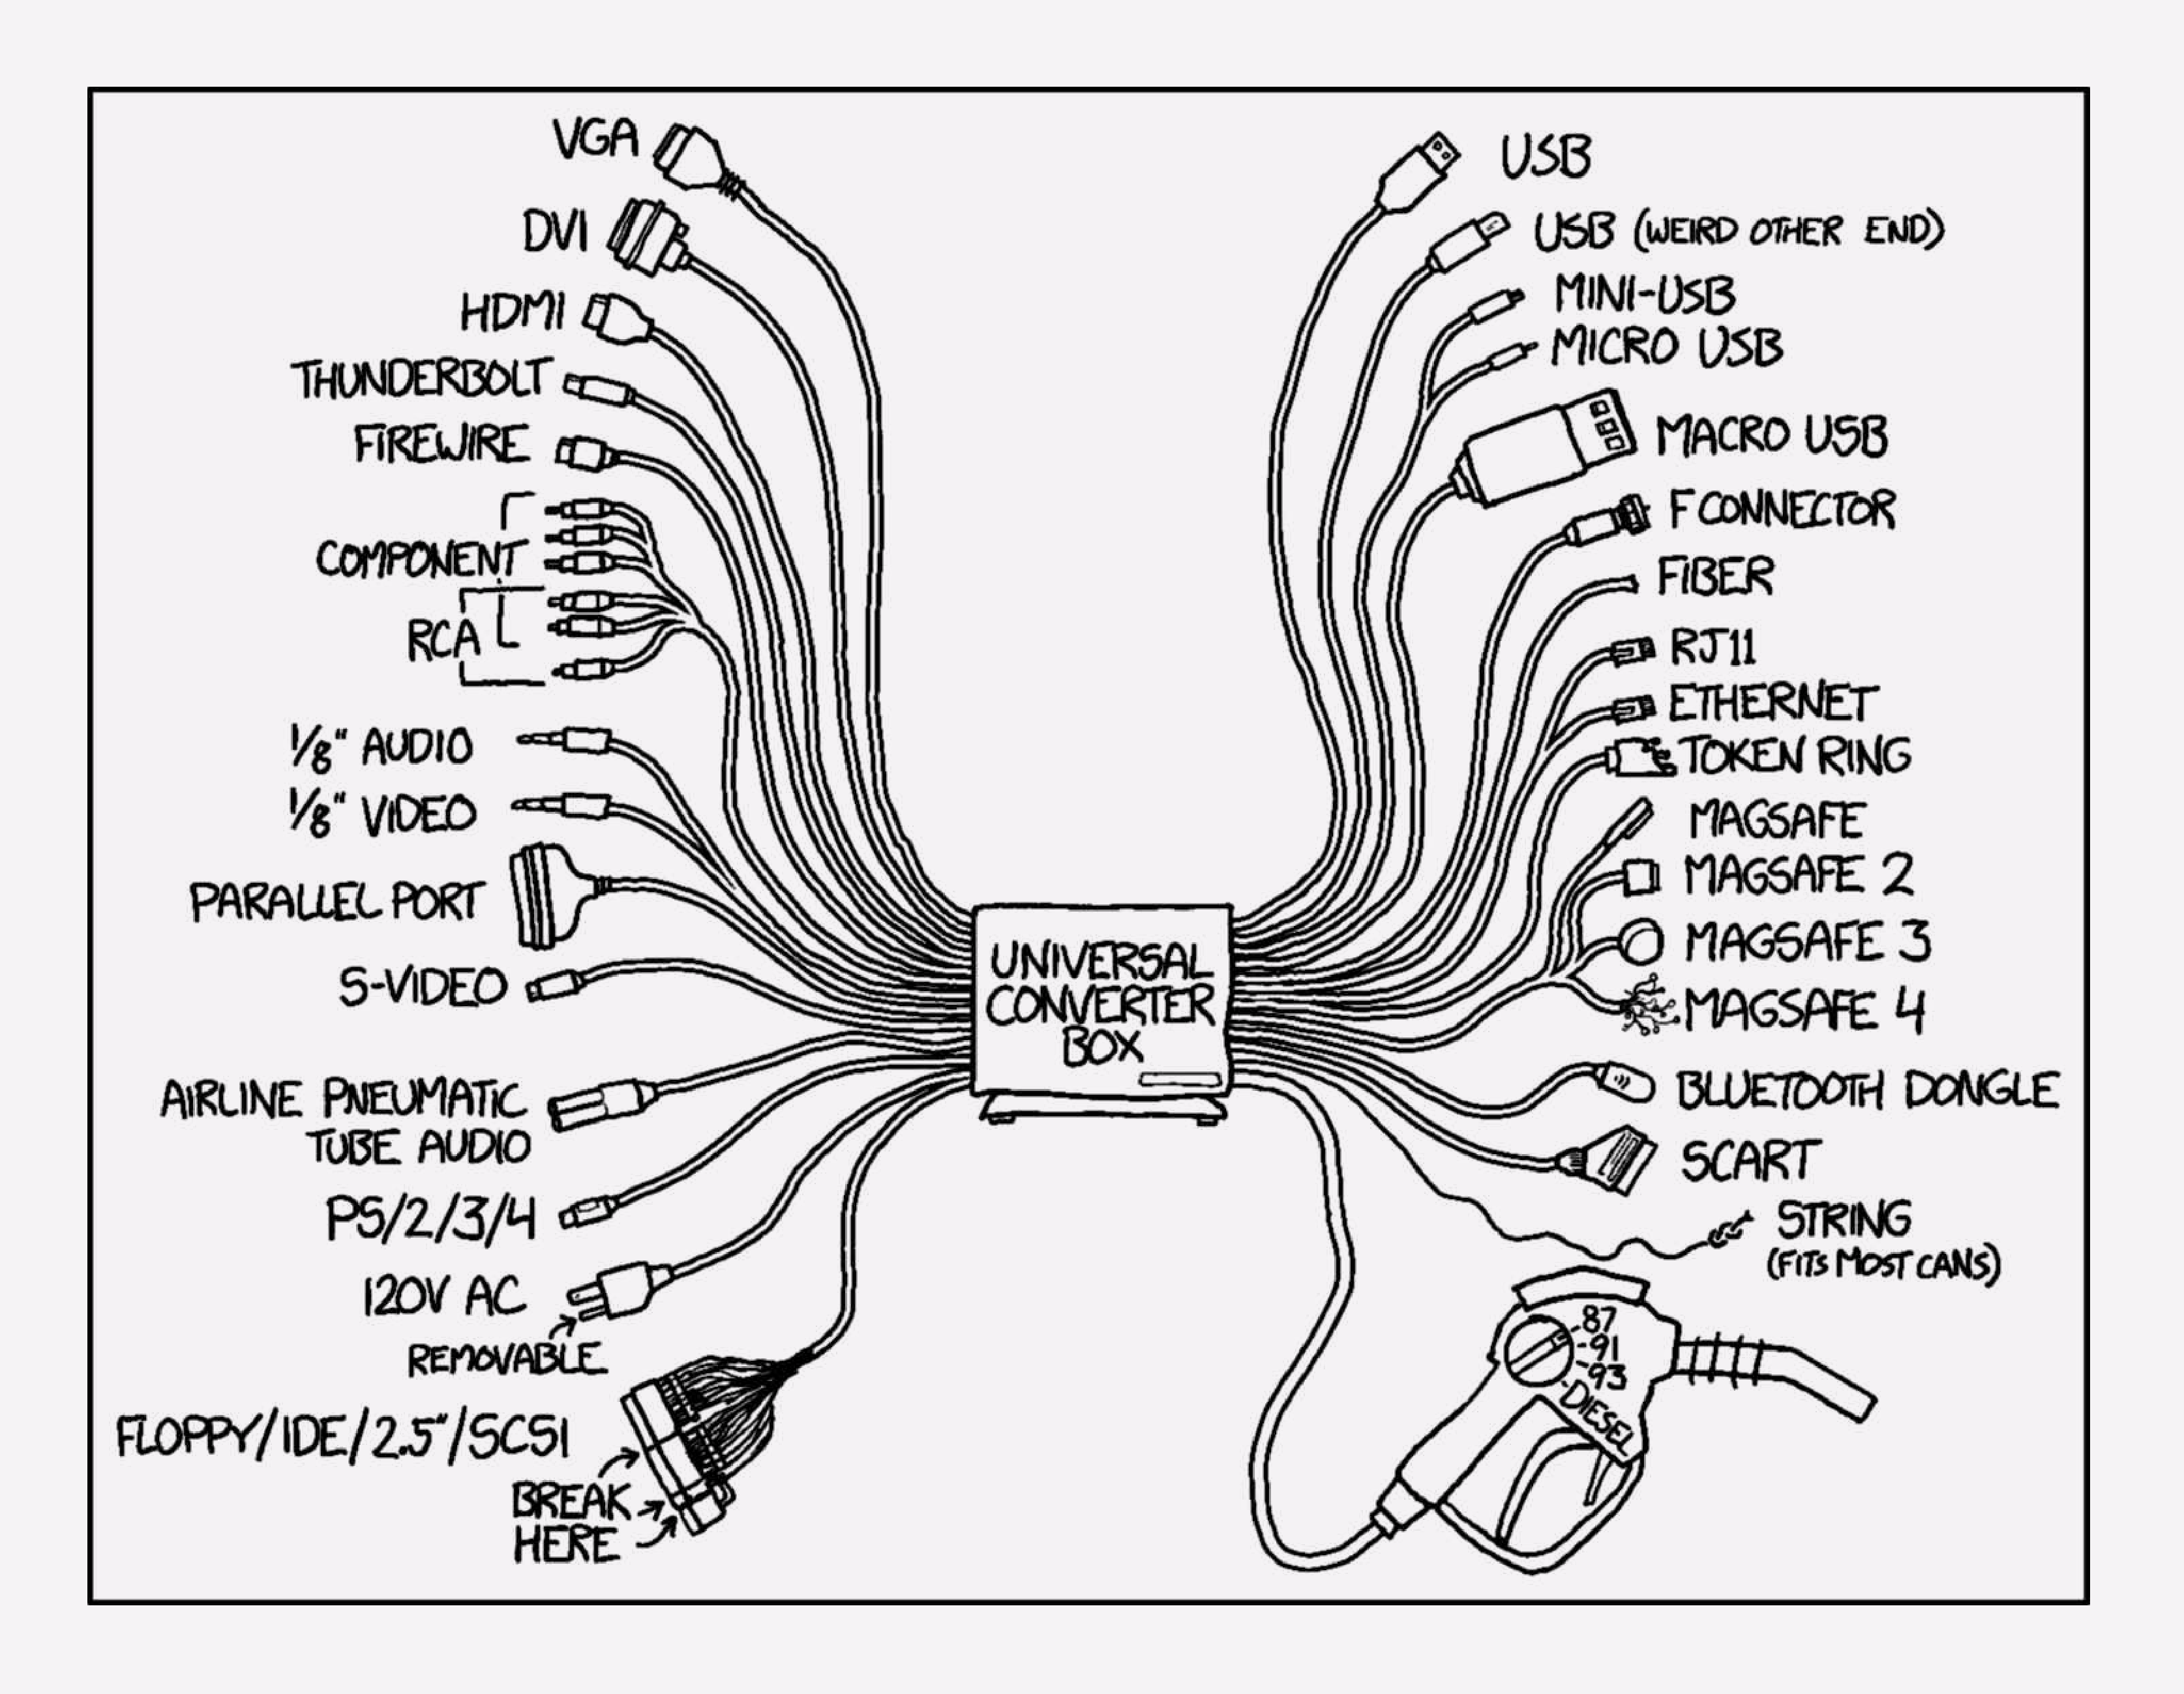 An xkcd cartoon titled 'Universal Converter Box'. The source image can be found at: https://xkcd.com/1406/